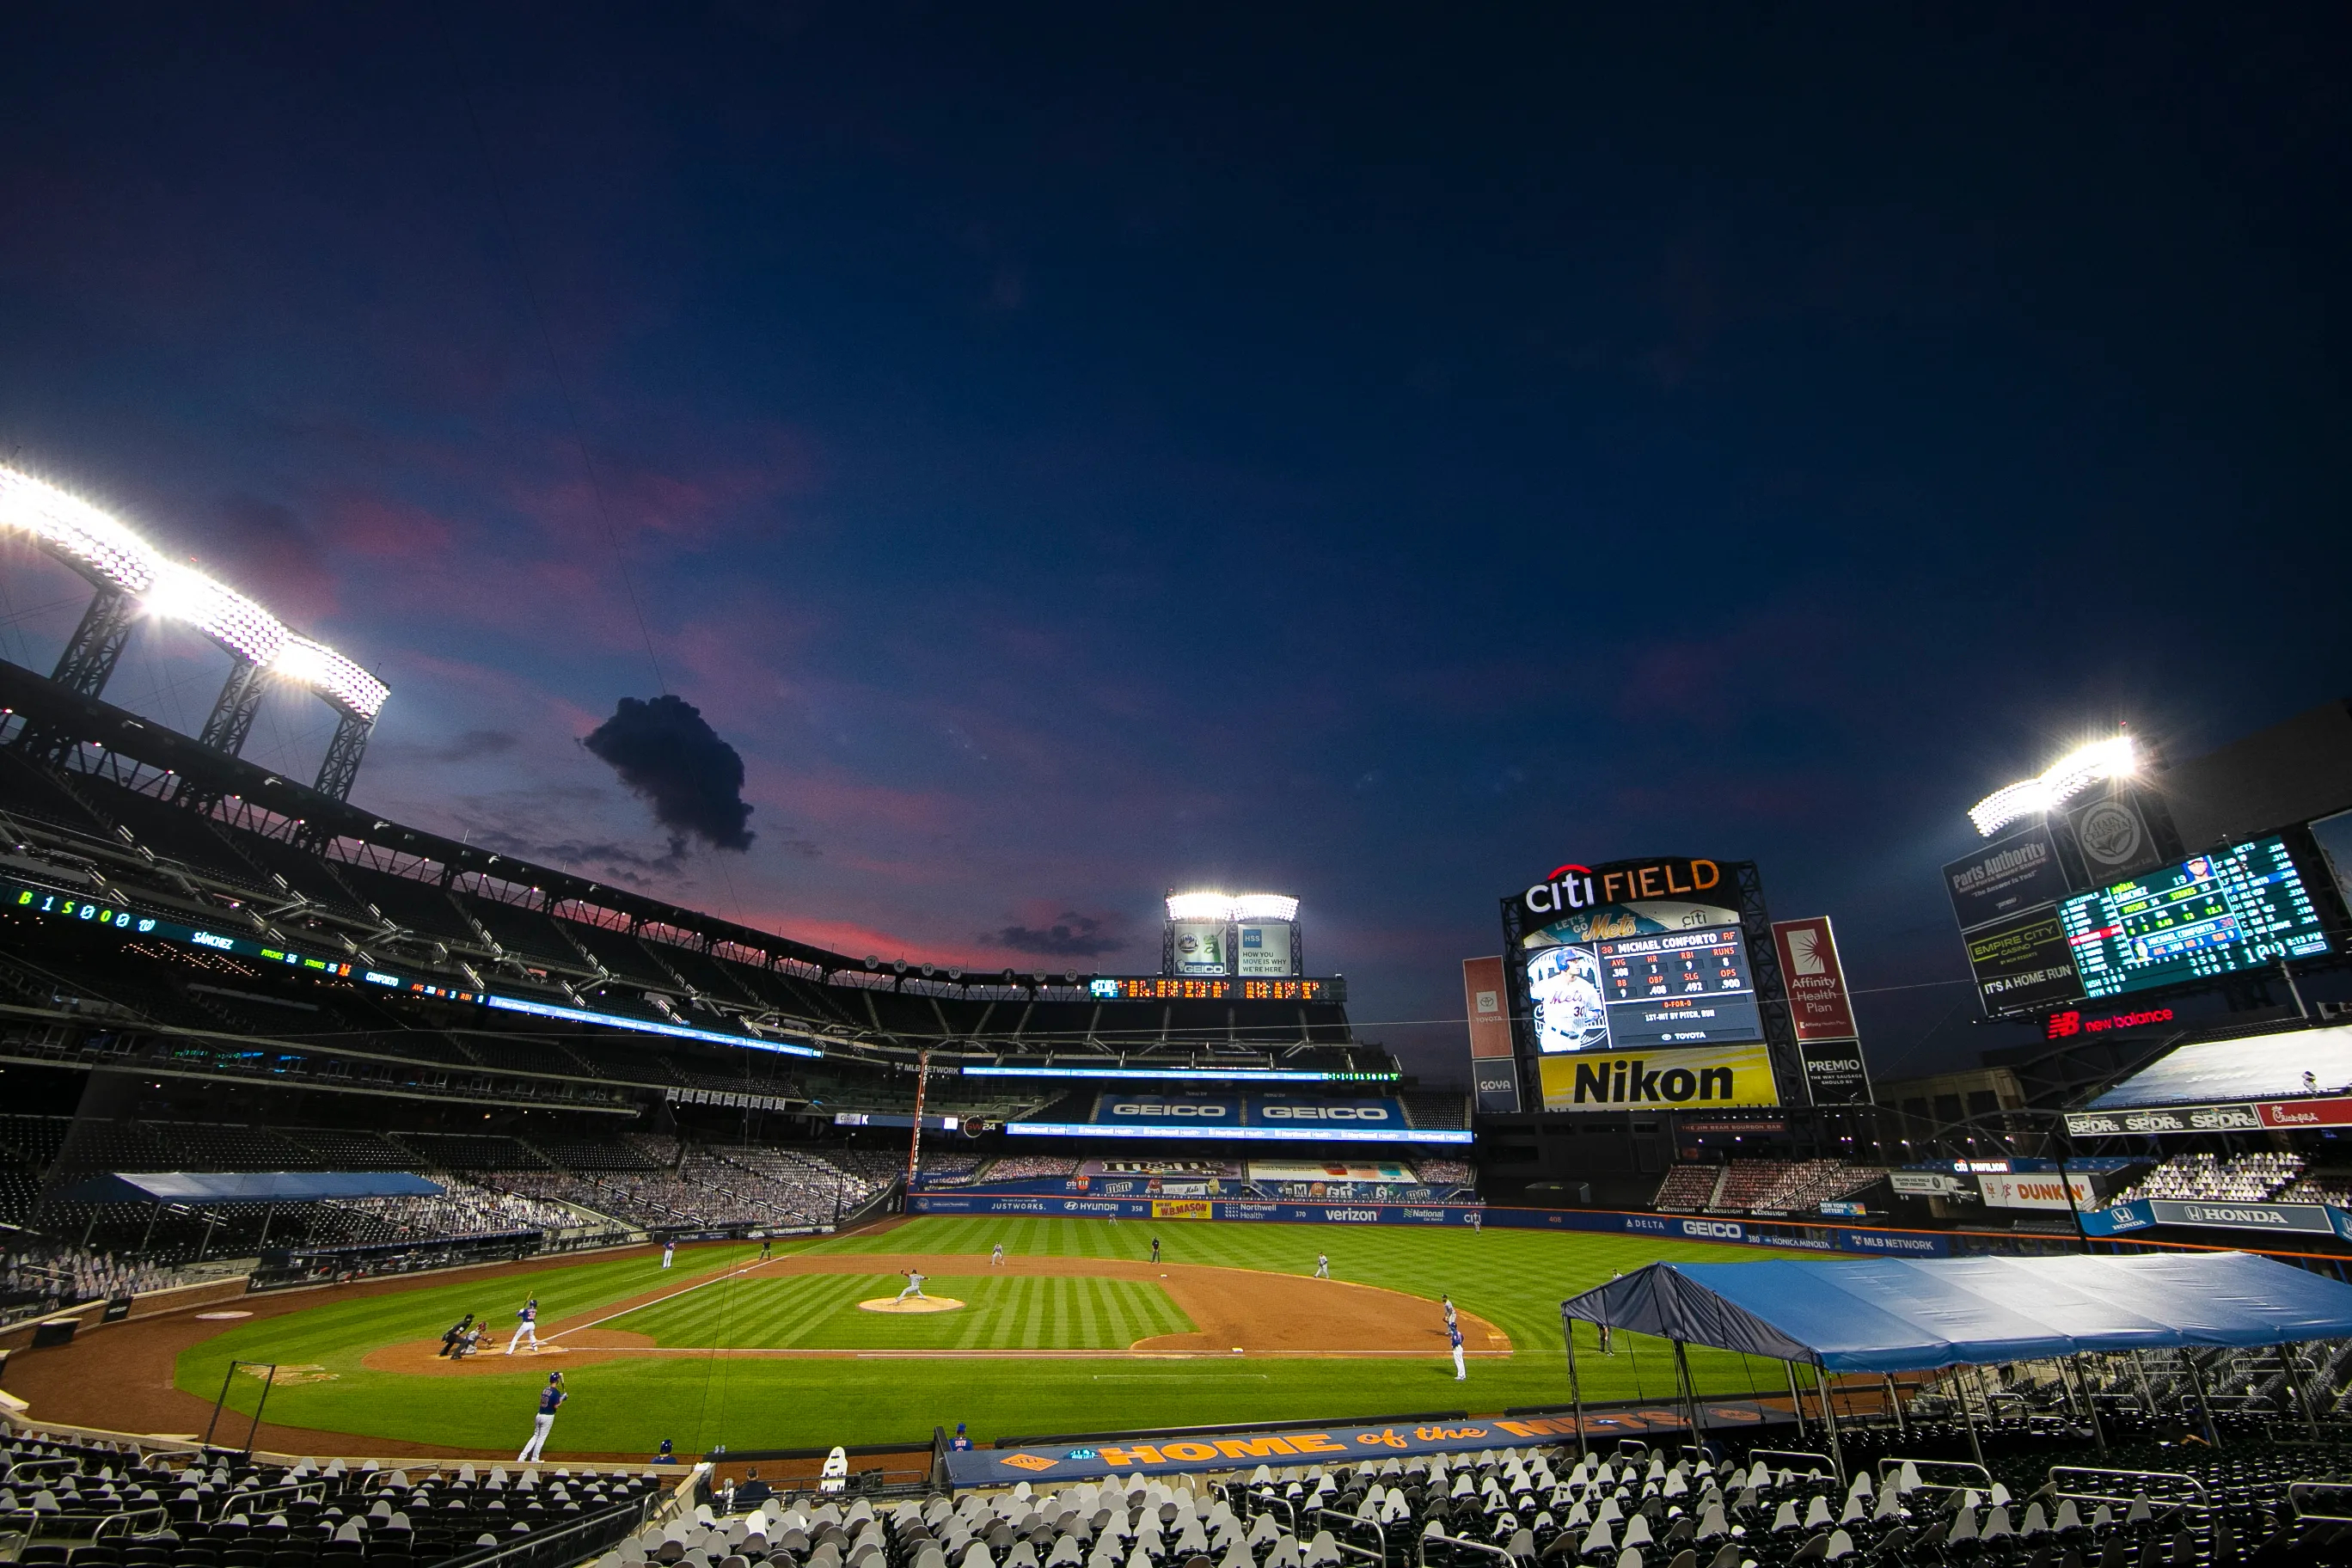 2736x1824 NY Mets game vs. Miami Marlins postponed due to COVID case on Mets